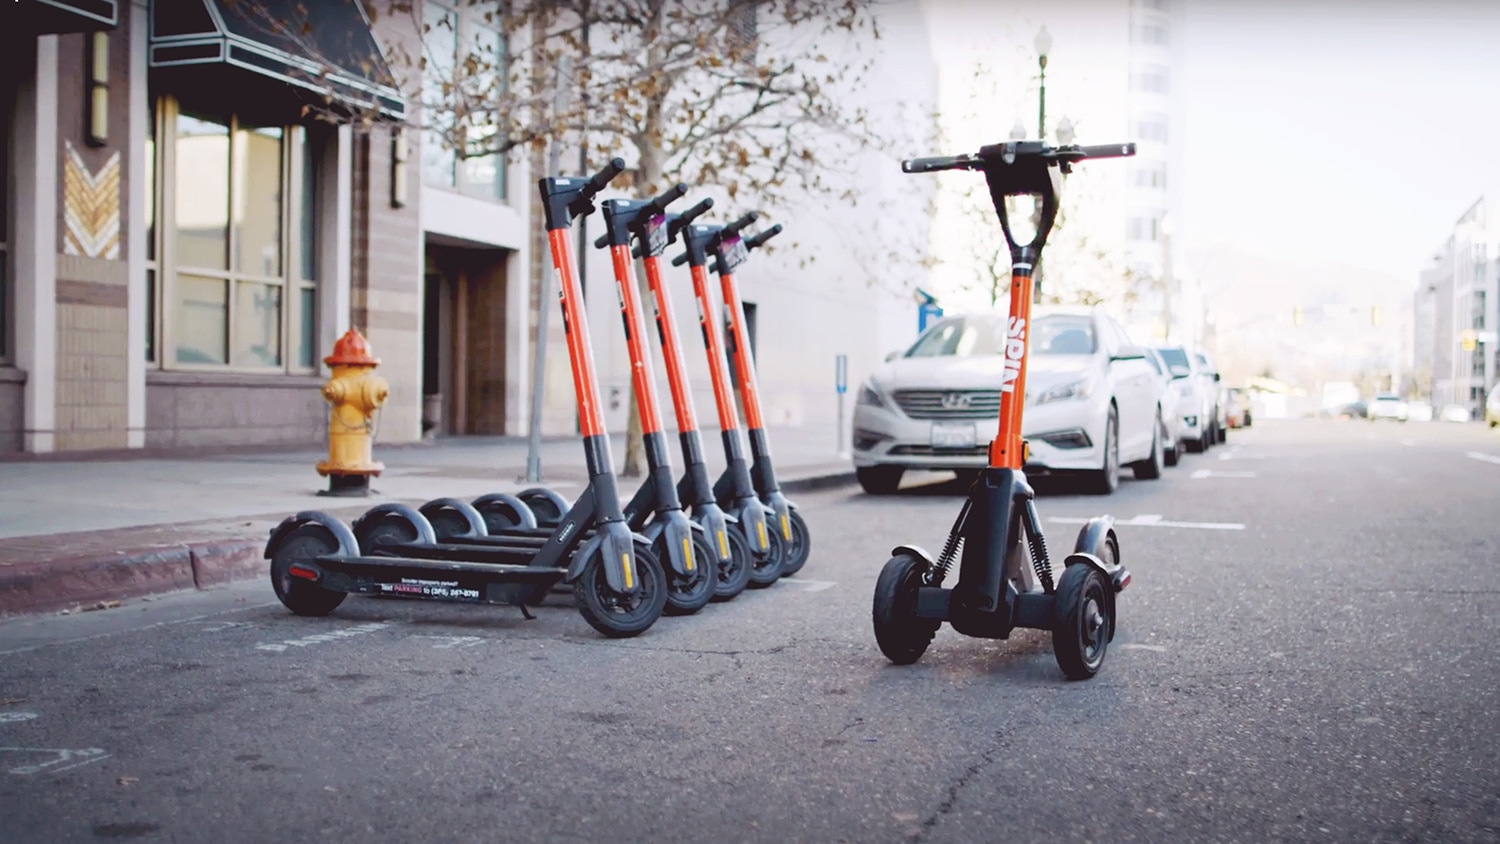 Spin's 3-wheeled e-scooters can be operated remotely to prevent sidewalk clutter.